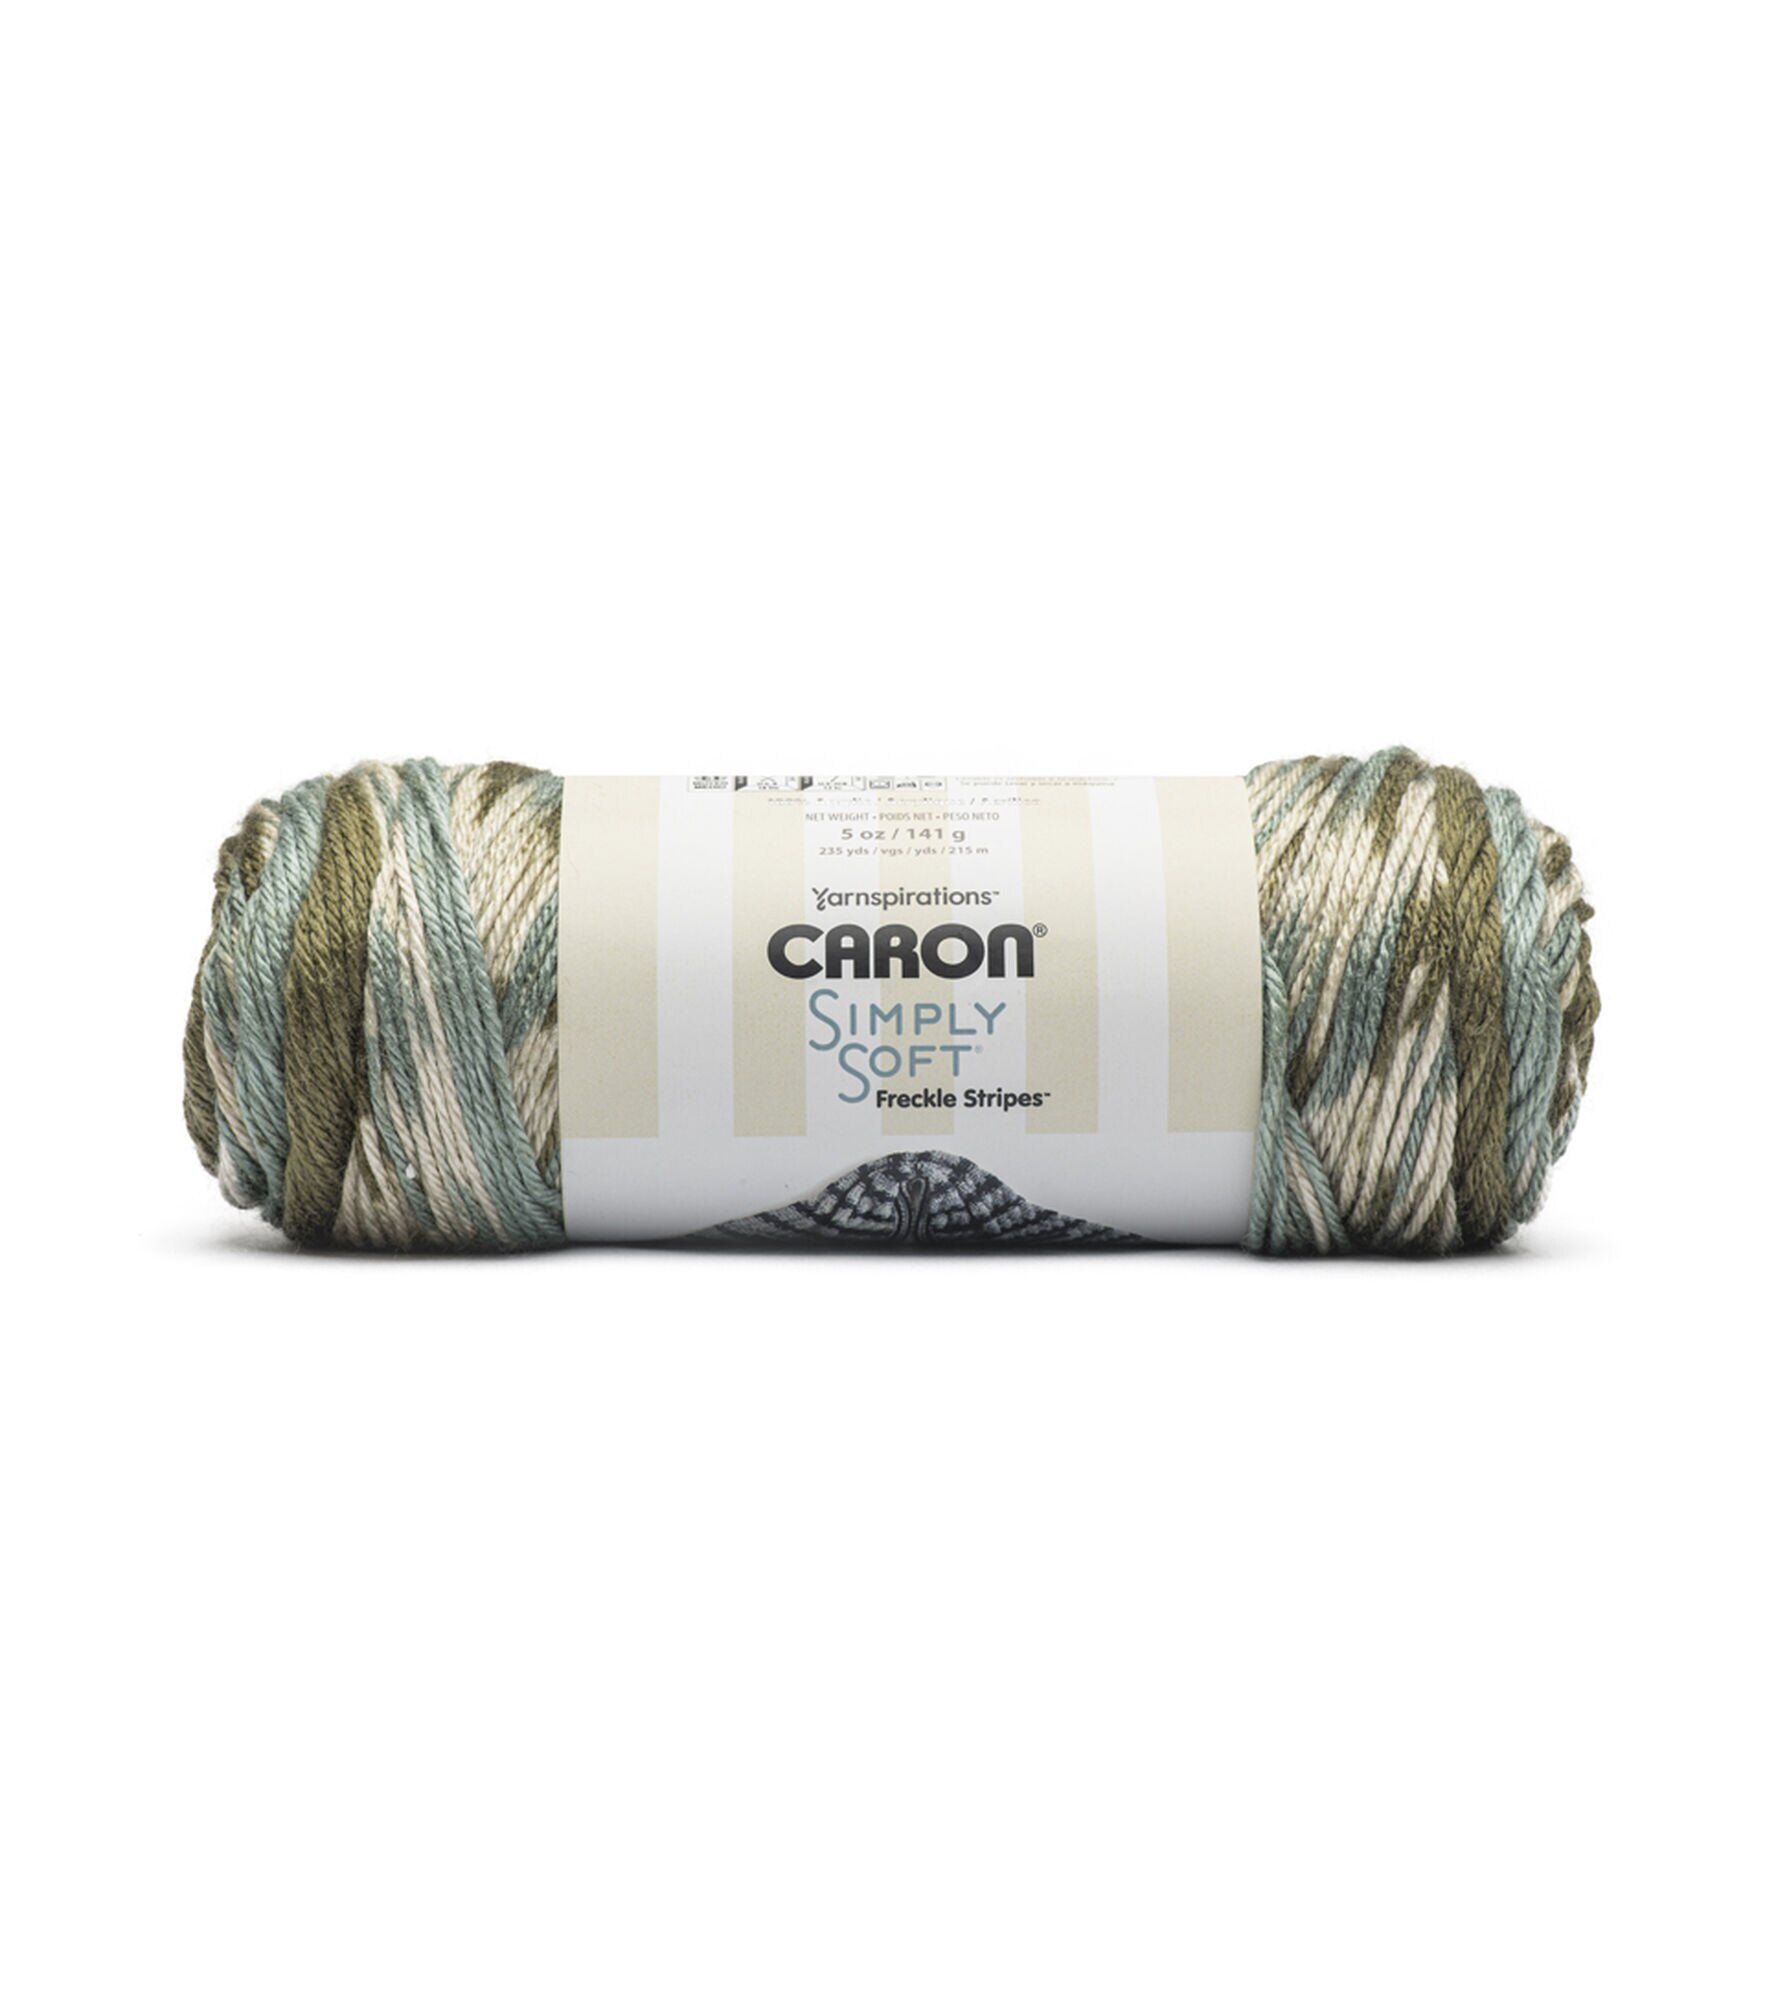 Yarn Review: Caron Simply Soft